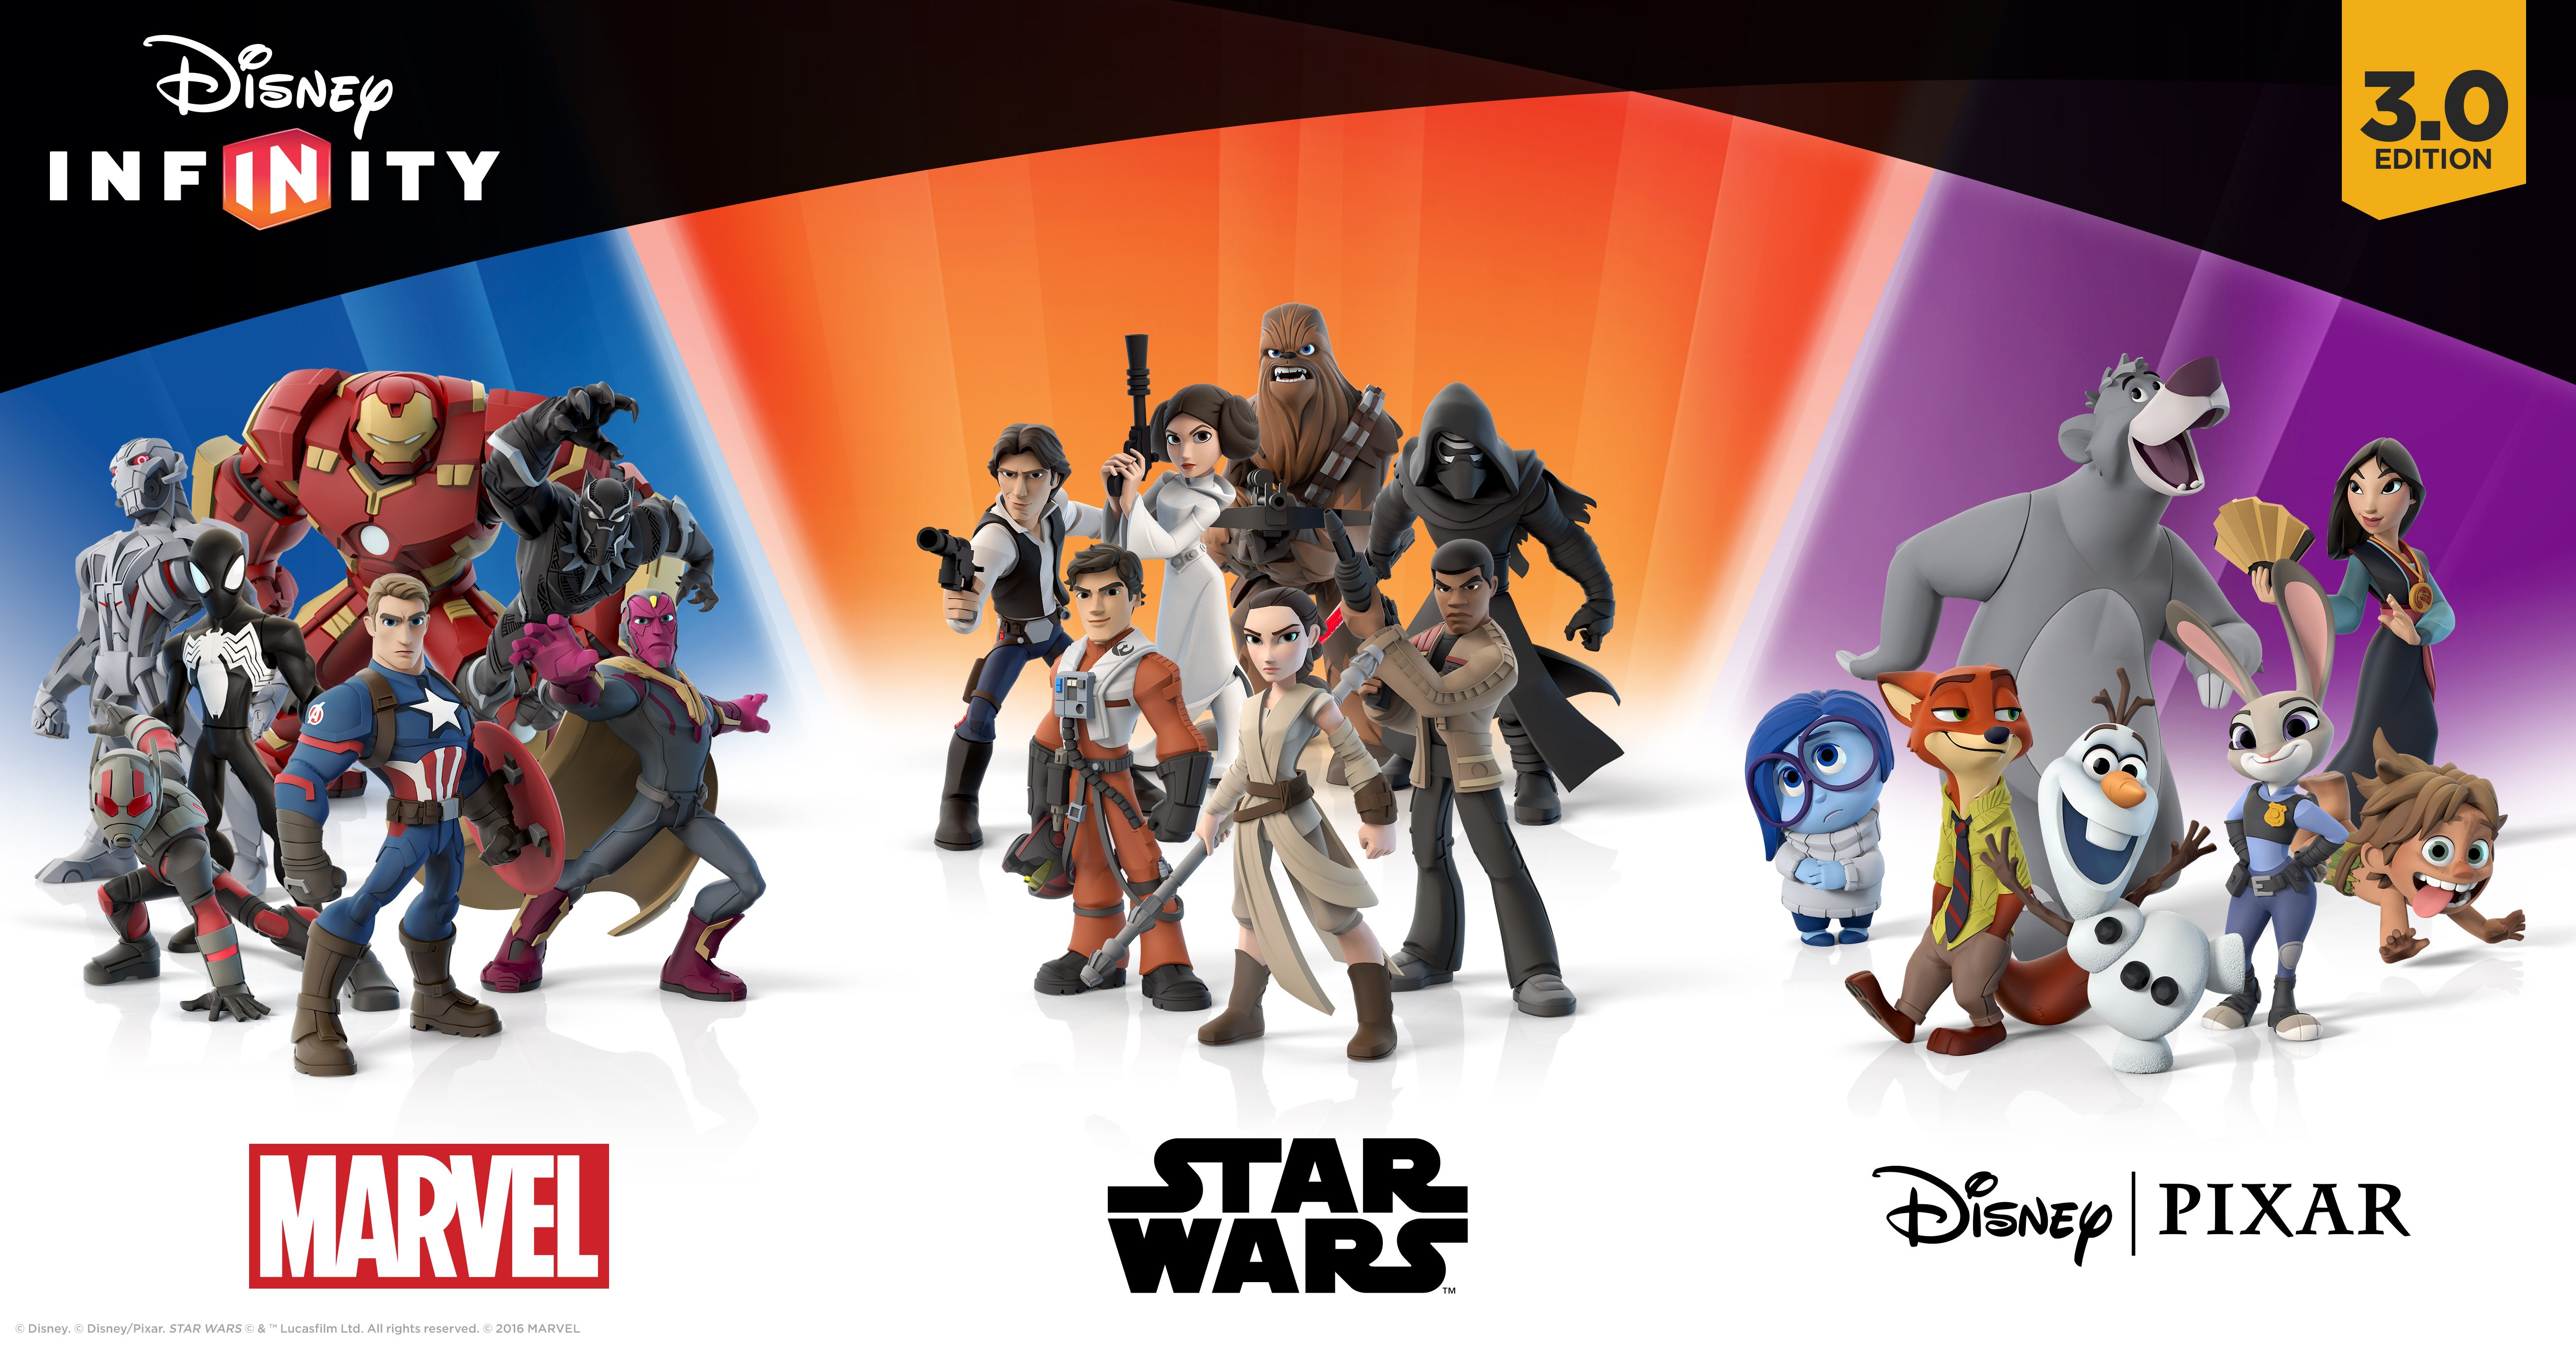 Amazing Disney Infinity Pictures & Backgrounds